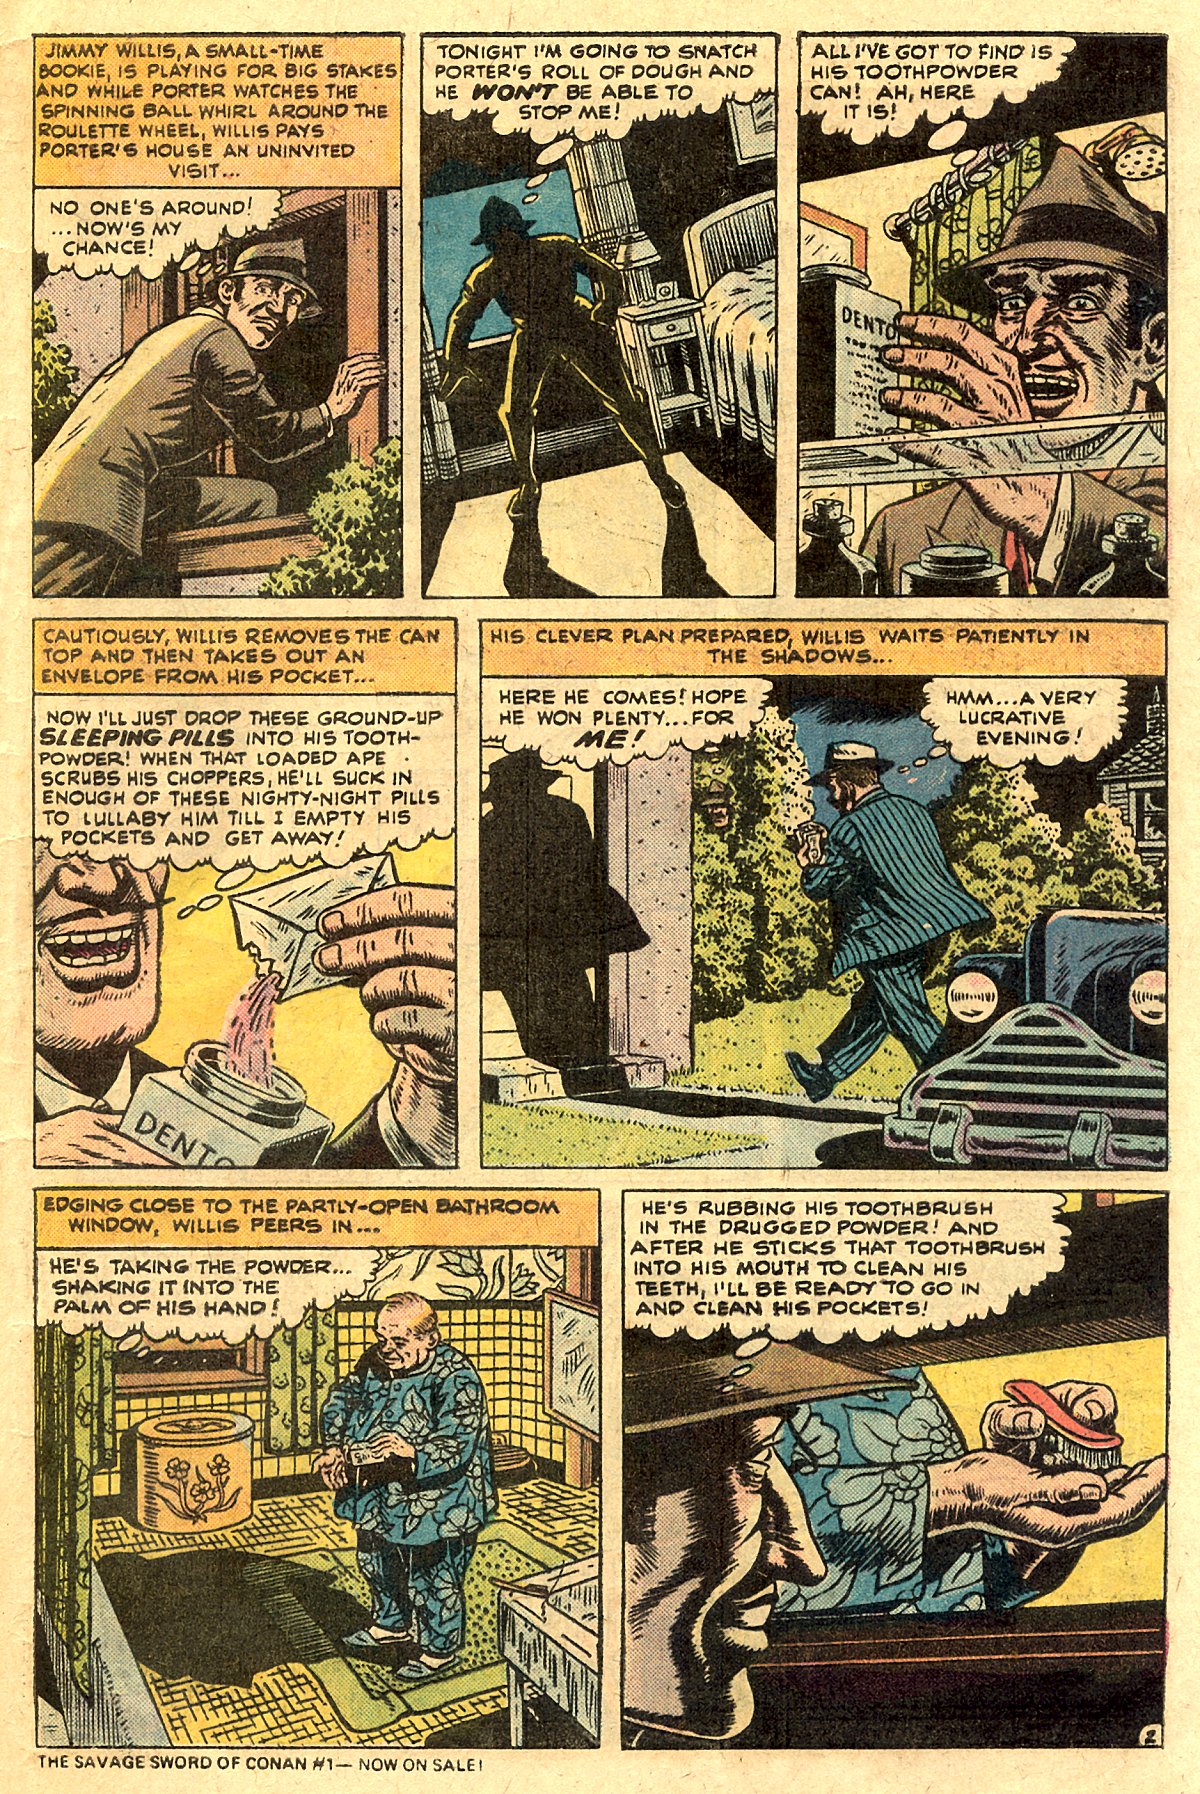 Marvel Tales (1949) 114 Page 17